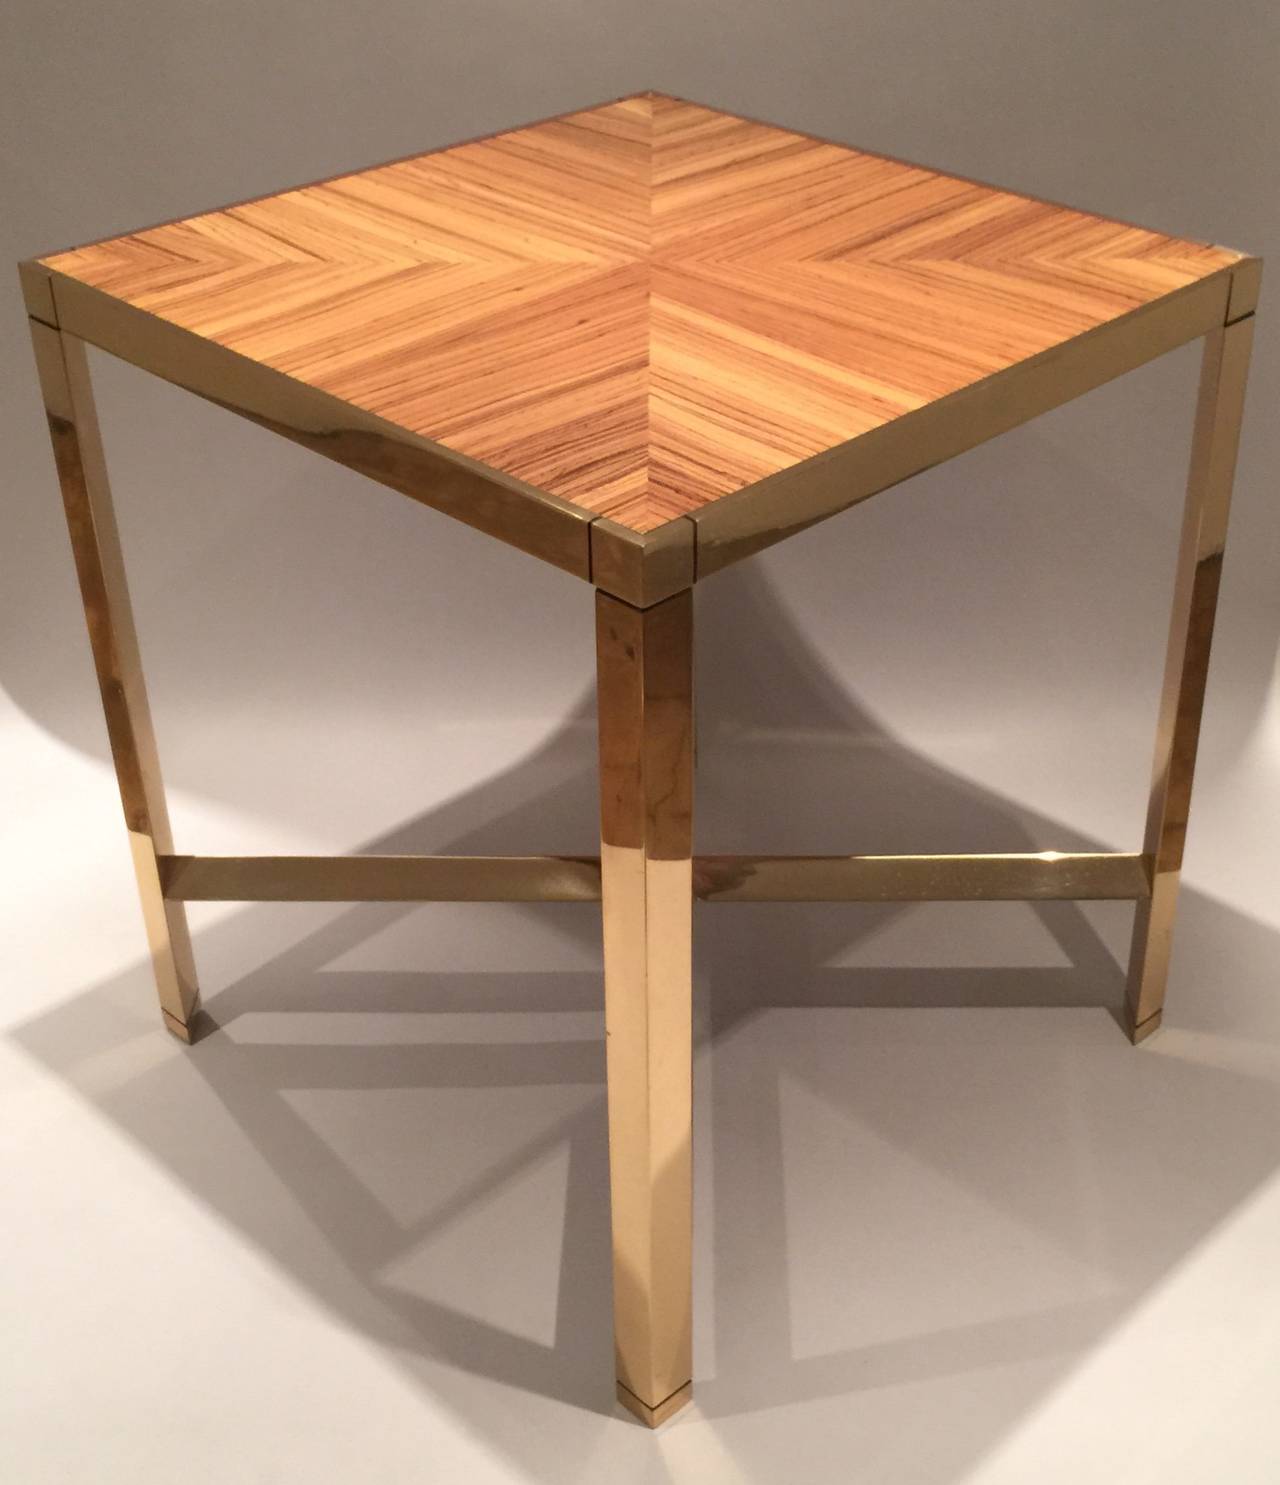 A 'Triangular Leg Metal End Table ' by Karl Springer in brass with a zebra wood veneer inset top.  Table is accompanied by a letter of authentication